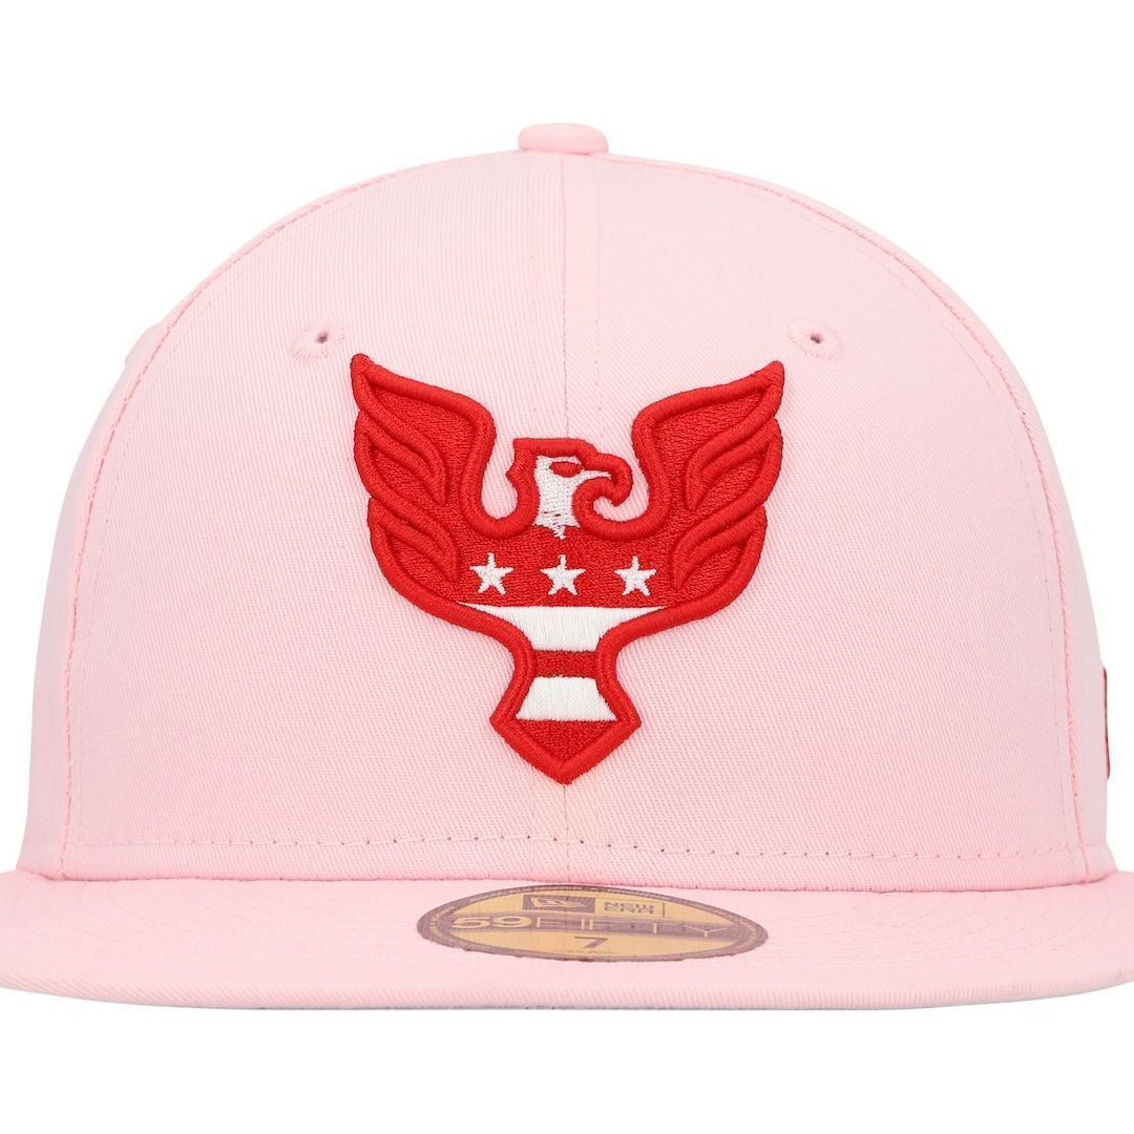 Men's New Era Pink D.C. United Pastel Pack 59FIFTY Fitted Hat - Image 3 of 4